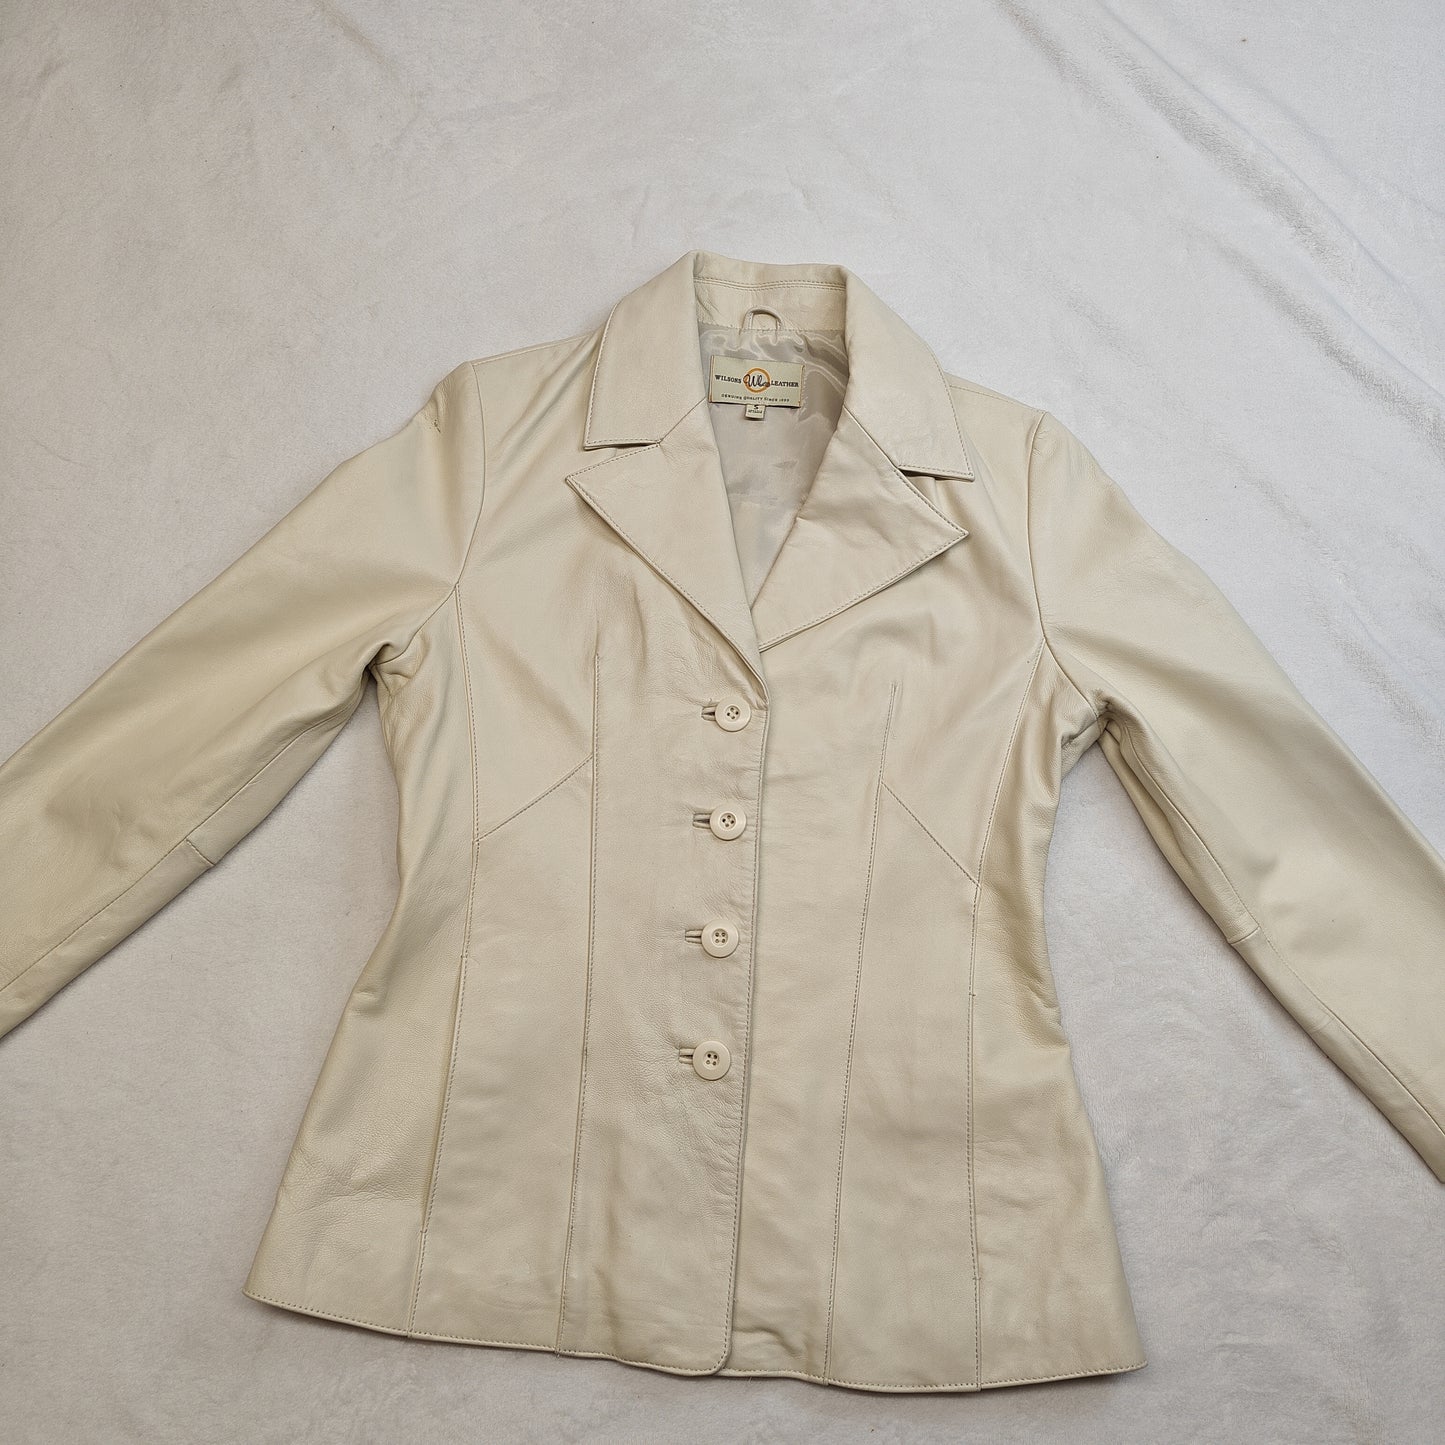 Wilson's White Genuine Leather Button Up Jacket Women Size Small